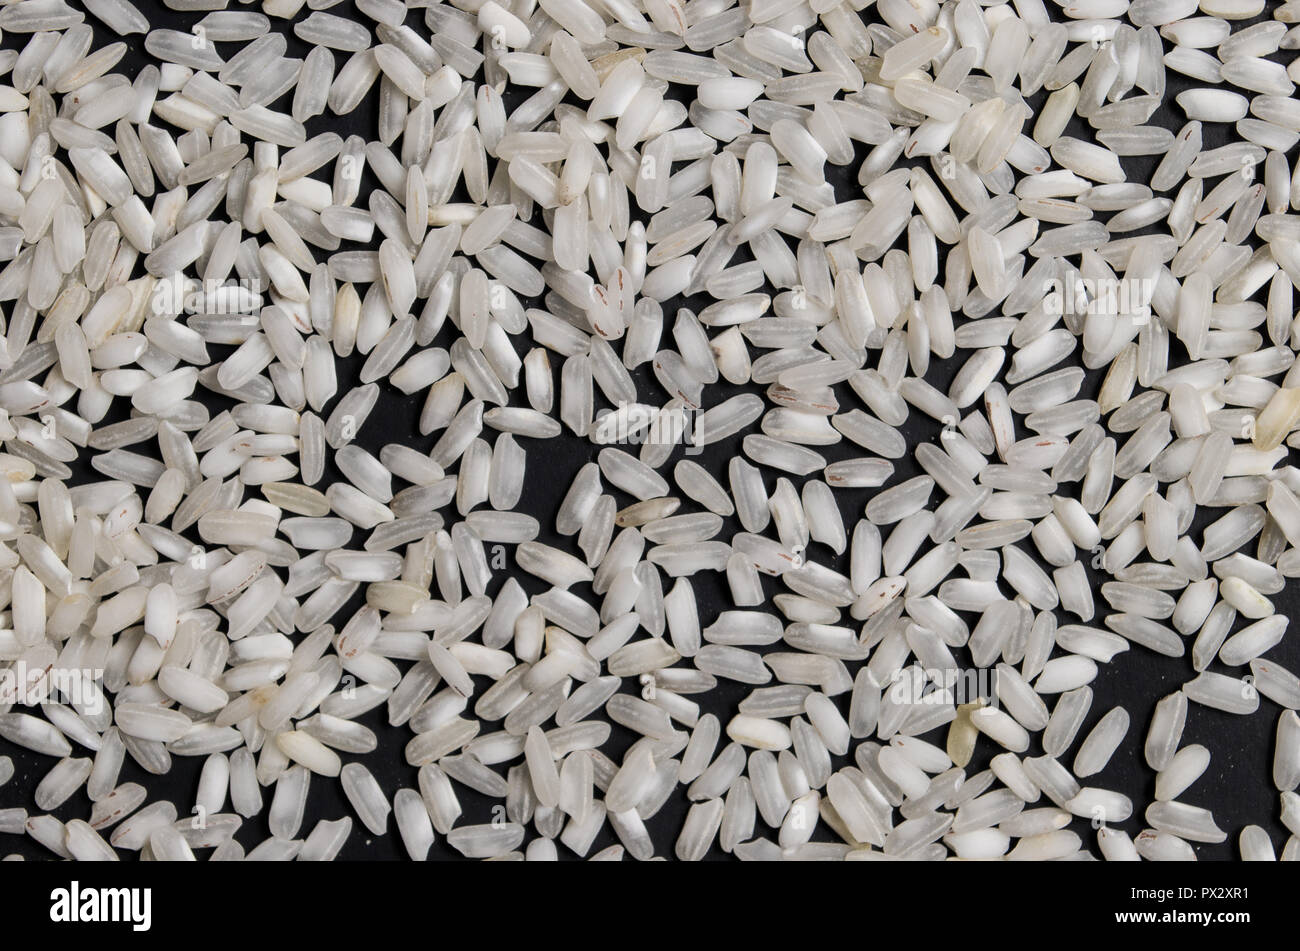 White rice scattered on an isolated black background, rice mountains ...